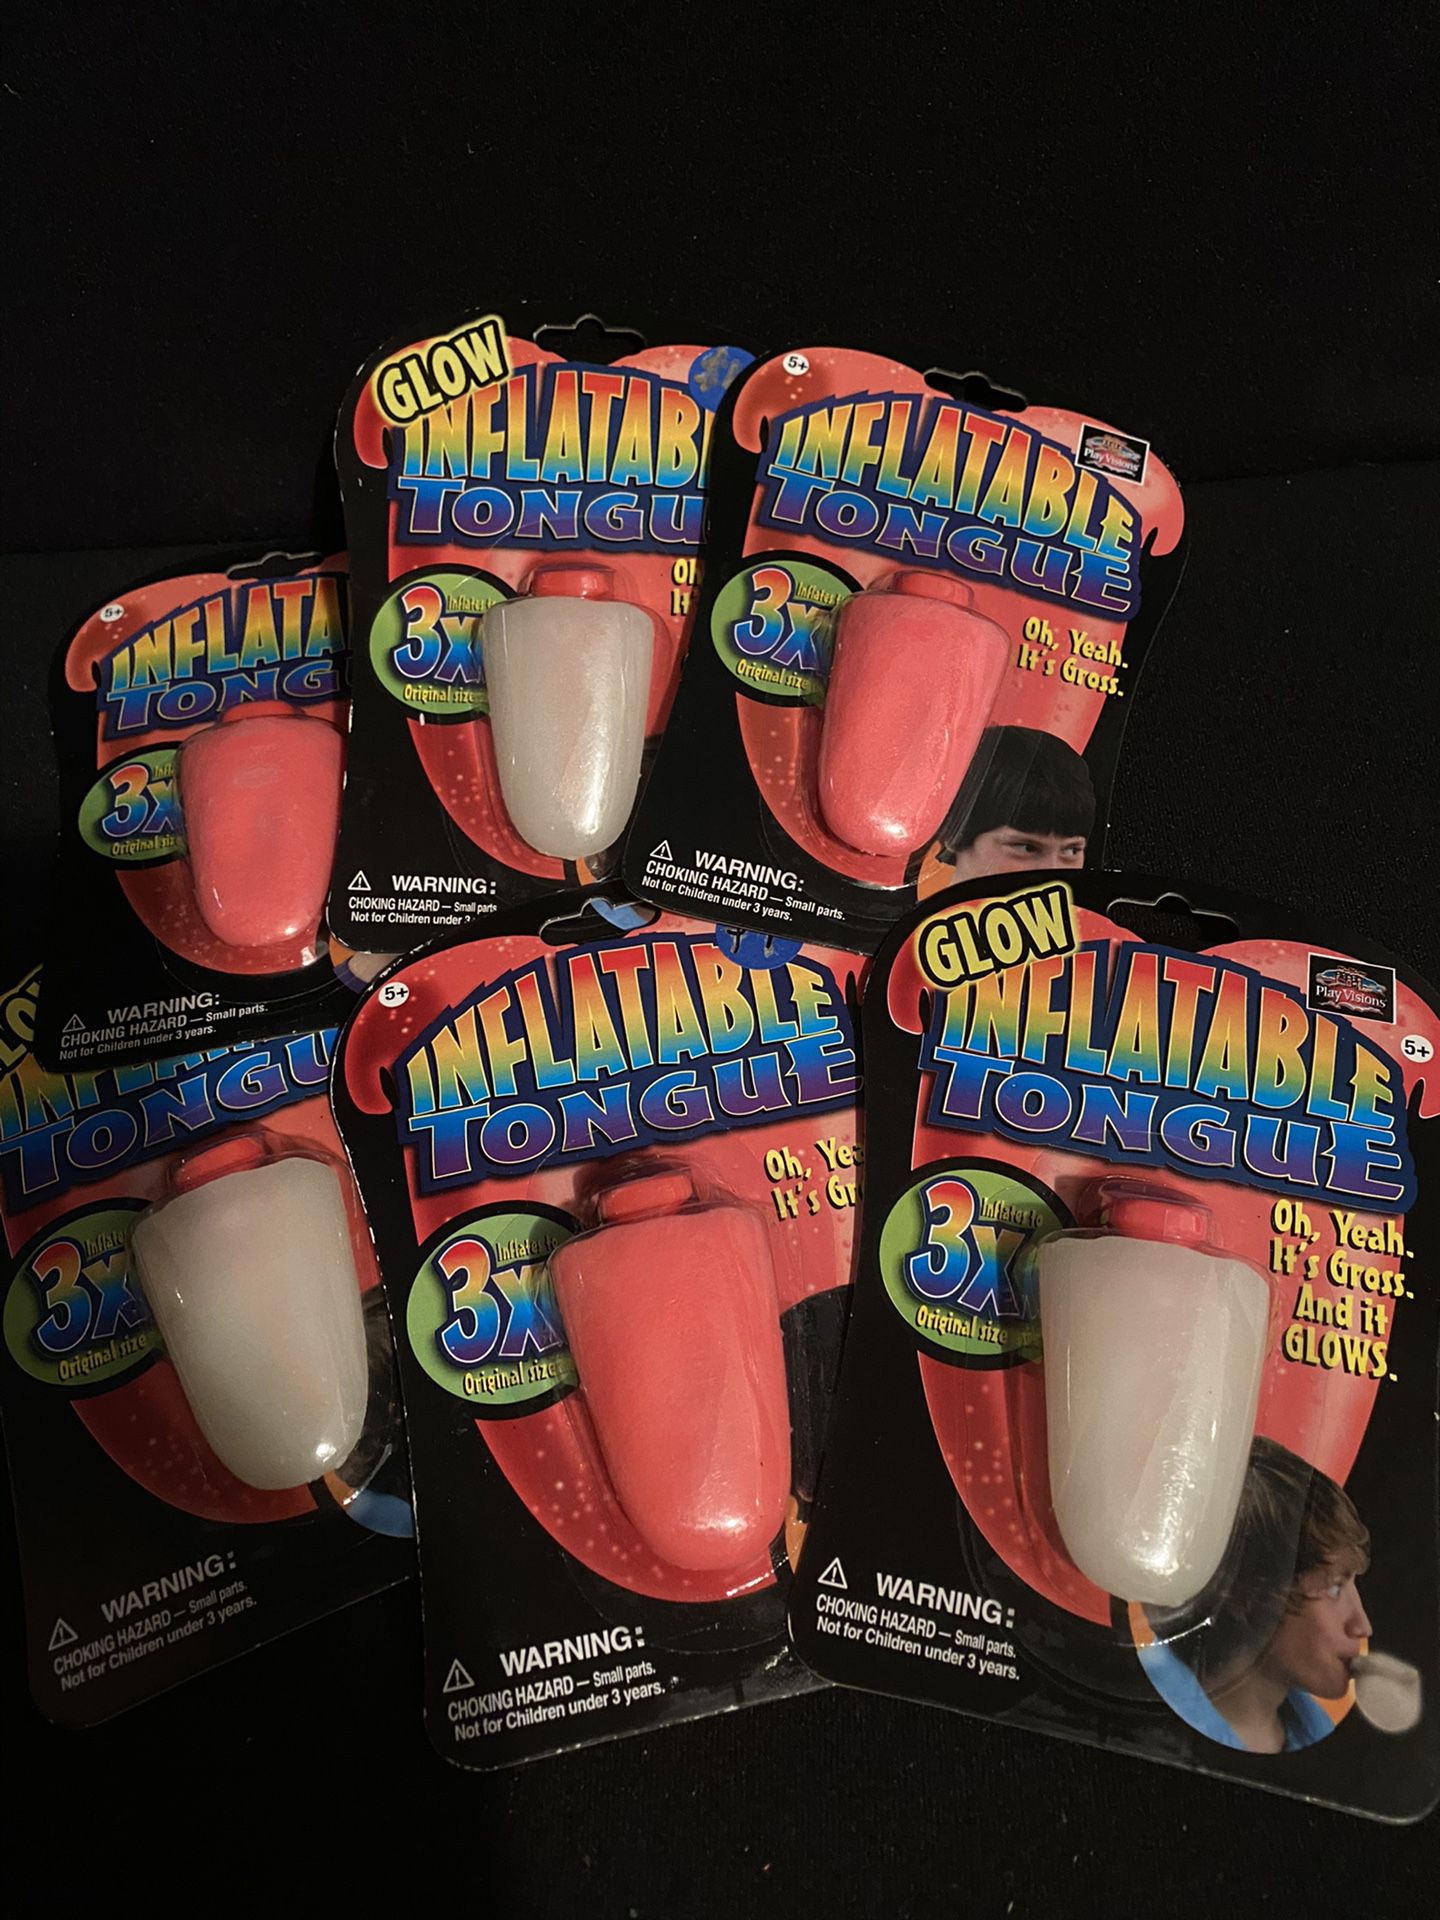 Original Inflatable Tongue, and Glow Inflatable Tongue